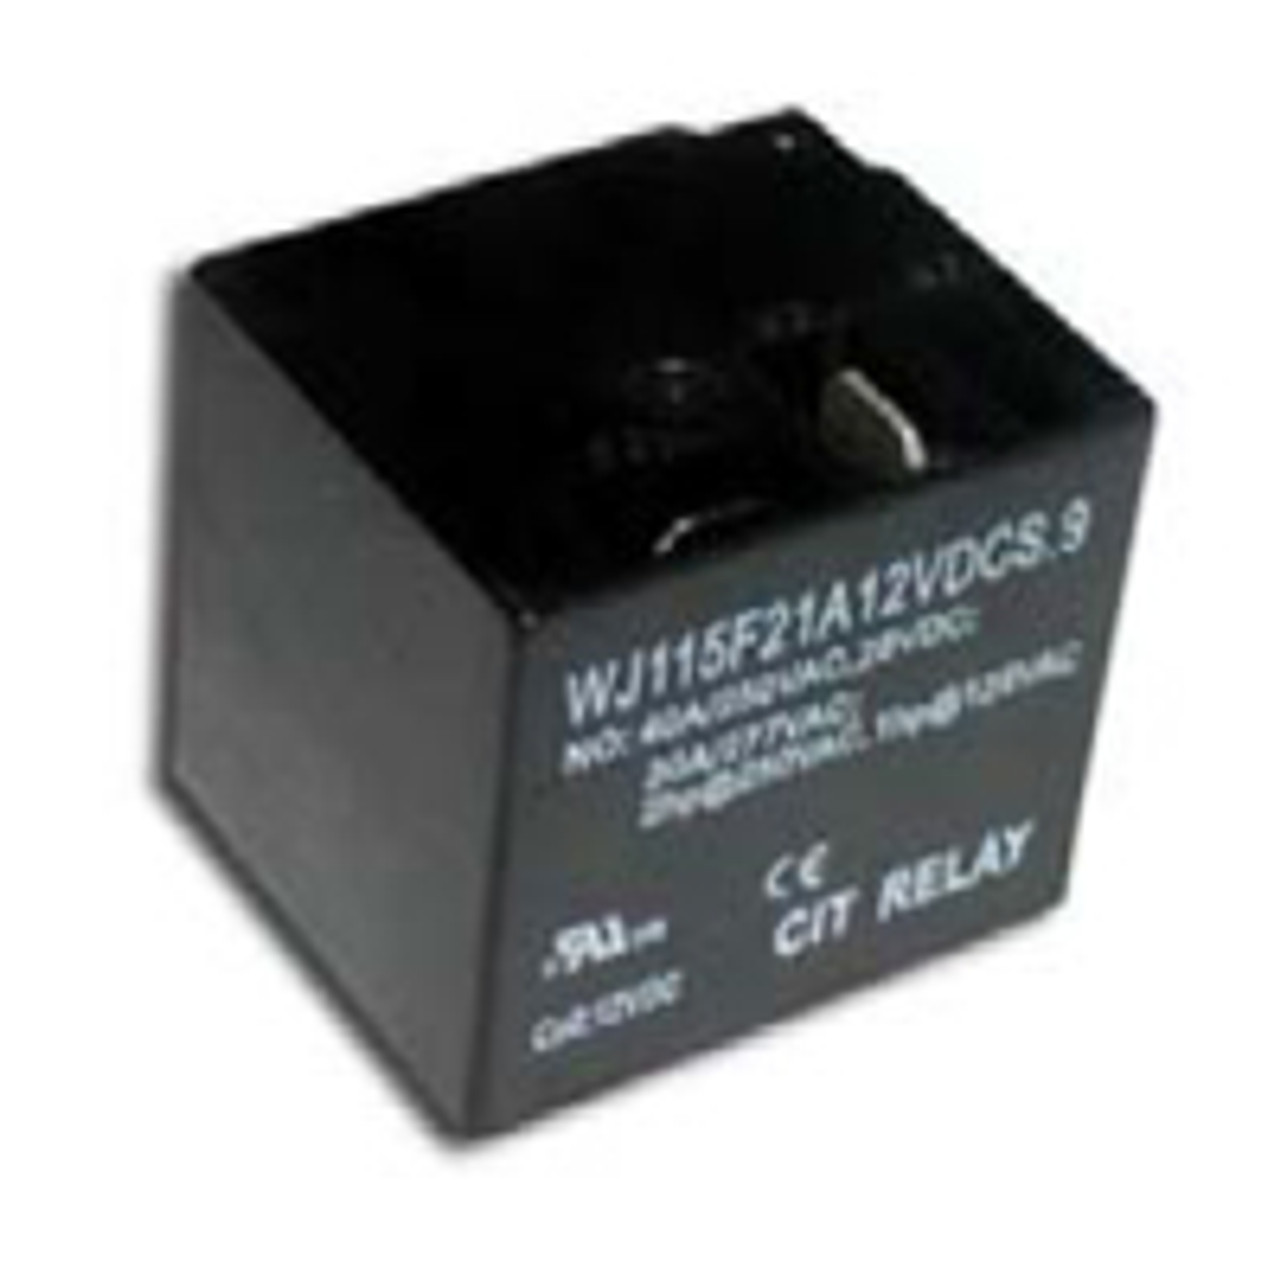 CIT Relay and Switch J115F21A5VDCN.6 Power Relays